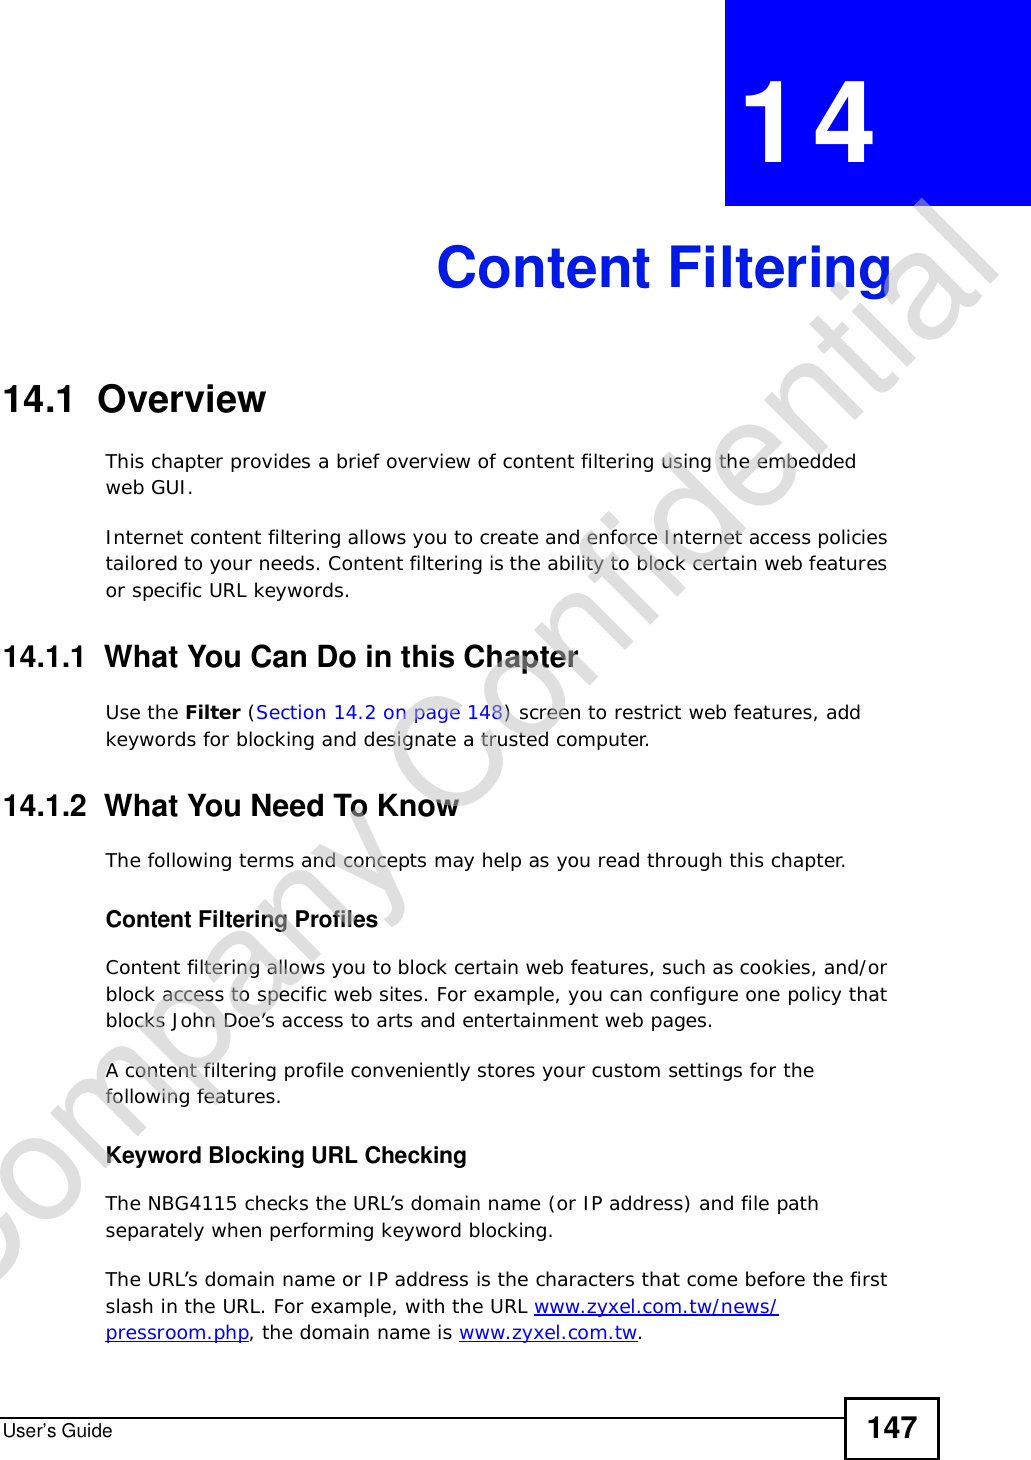 User’s Guide 147CHAPTER 14Content Filtering14.1  OverviewThis chapter provides a brief overview of content filtering using the embedded web GUI.Internet content filtering allows you to create and enforce Internet access policies tailored to your needs. Content filtering is the ability to block certain web features or specific URL keywords.14.1.1  What You Can Do in this ChapterUse the Filter (Section 14.2 on page 148) screen to restrict web features, add keywords for blocking and designate a trusted computer.14.1.2  What You Need To KnowThe following terms and concepts may help as you read through this chapter.Content Filtering ProfilesContent filtering allows you to block certain web features, such as cookies, and/or block access to specific web sites. For example, you can configure one policy that blocks John Doe’s access to arts and entertainment web pages.A content filtering profile conveniently stores your custom settings for the following features.Keyword Blocking URL CheckingThe NBG4115 checks the URL’s domain name (or IP address) and file path separately when performing keyword blocking. The URL’s domain name or IP address is the characters that come before the first slash in the URL. For example, with the URL www.zyxel.com.tw/news/pressroom.php, the domain name is www.zyxel.com.tw.Company Confidential